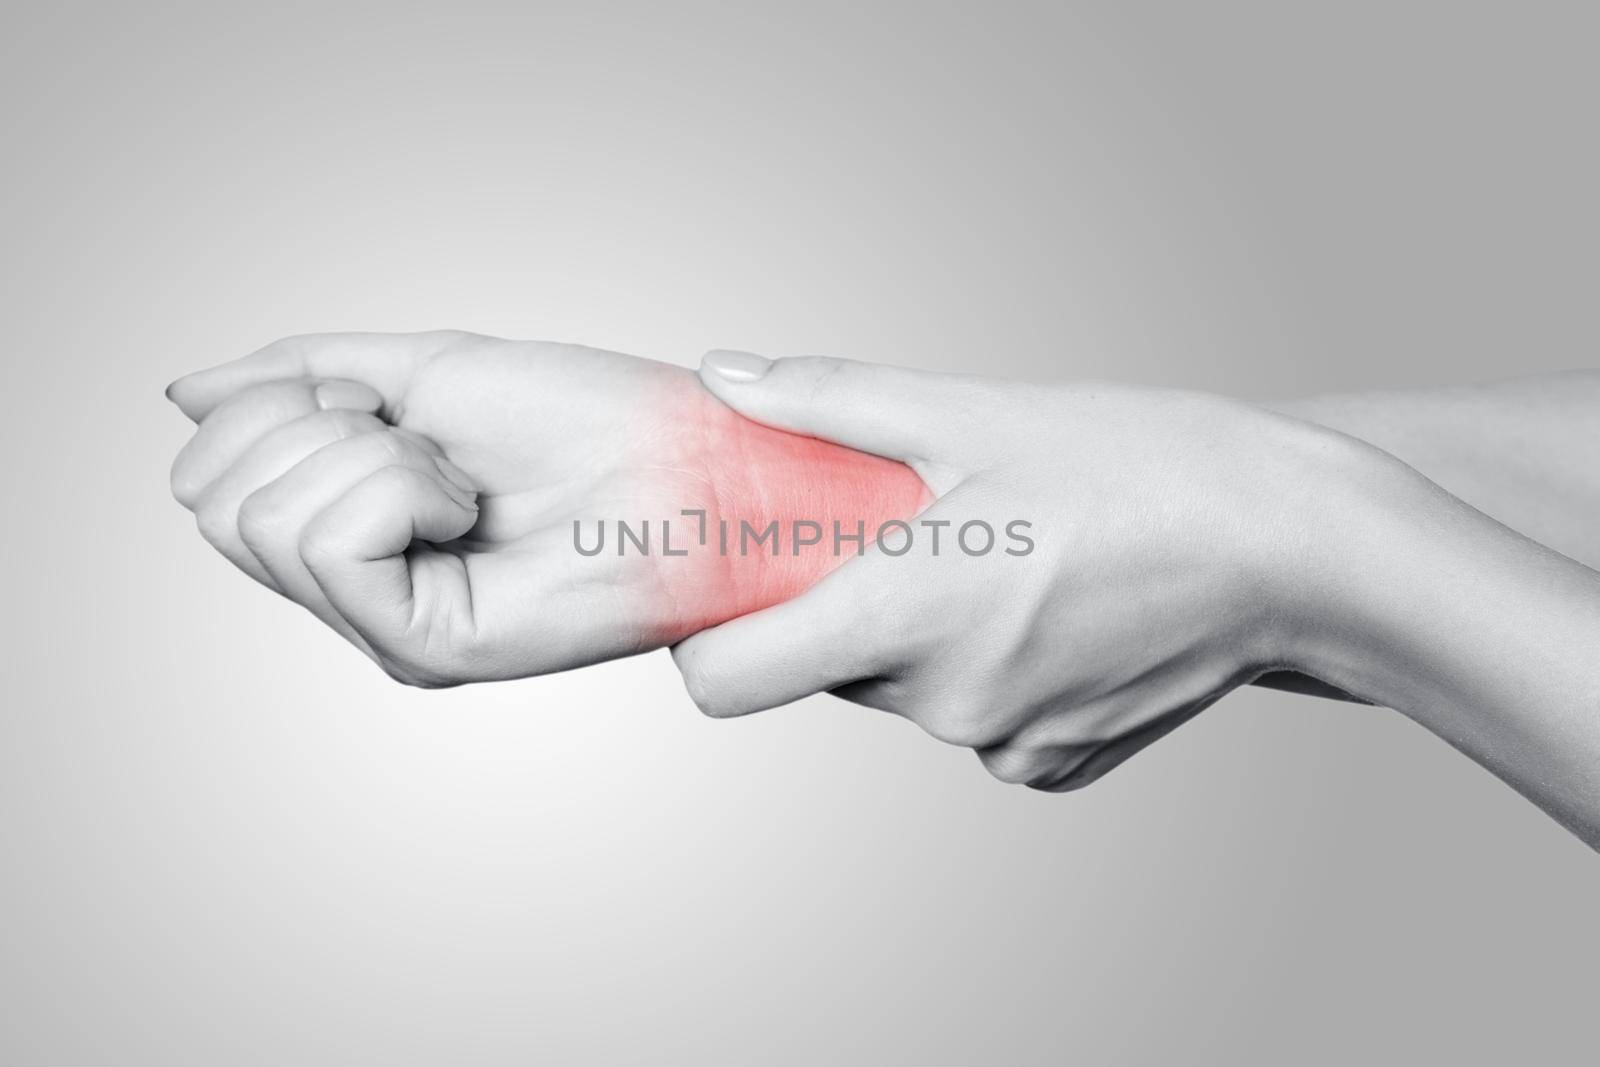 Closeup view of a young woman with pain on hand on gray background. Black and white photo with red dot.